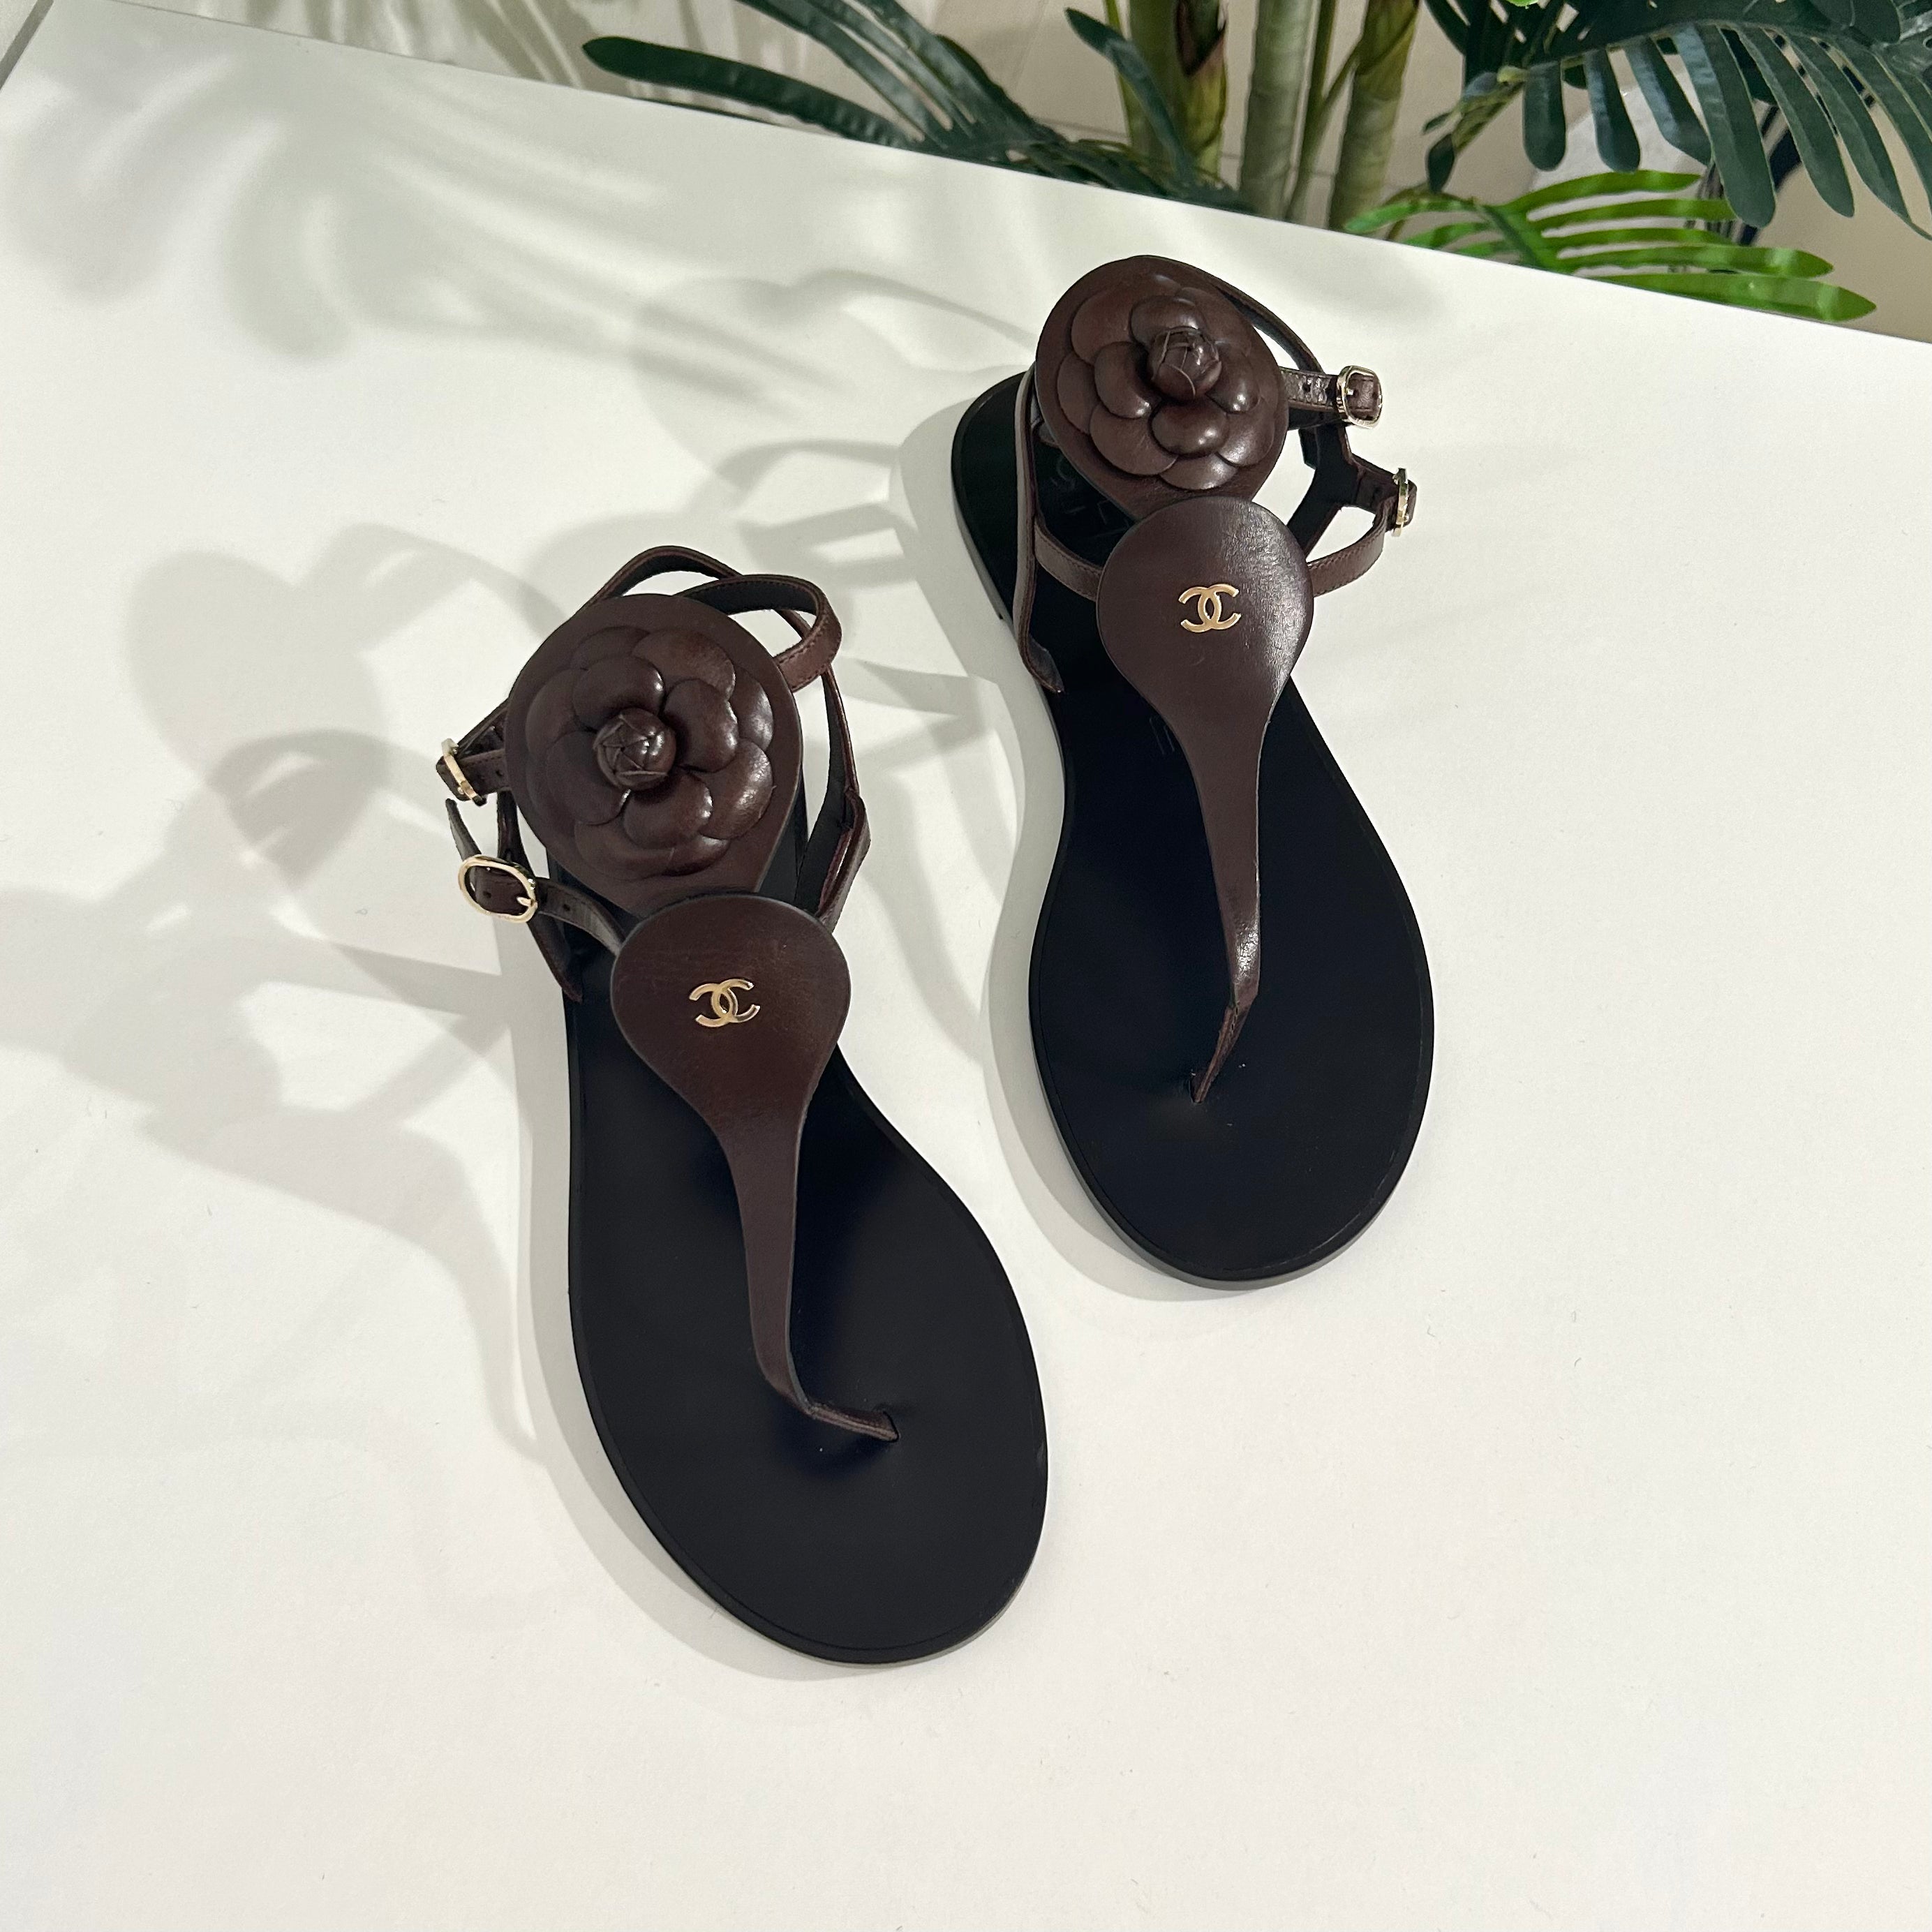 AUTHENTIC CHANEL CAMELLIA RUBBER FLIP FLOPS SIZE 7 MADE IN ITALY